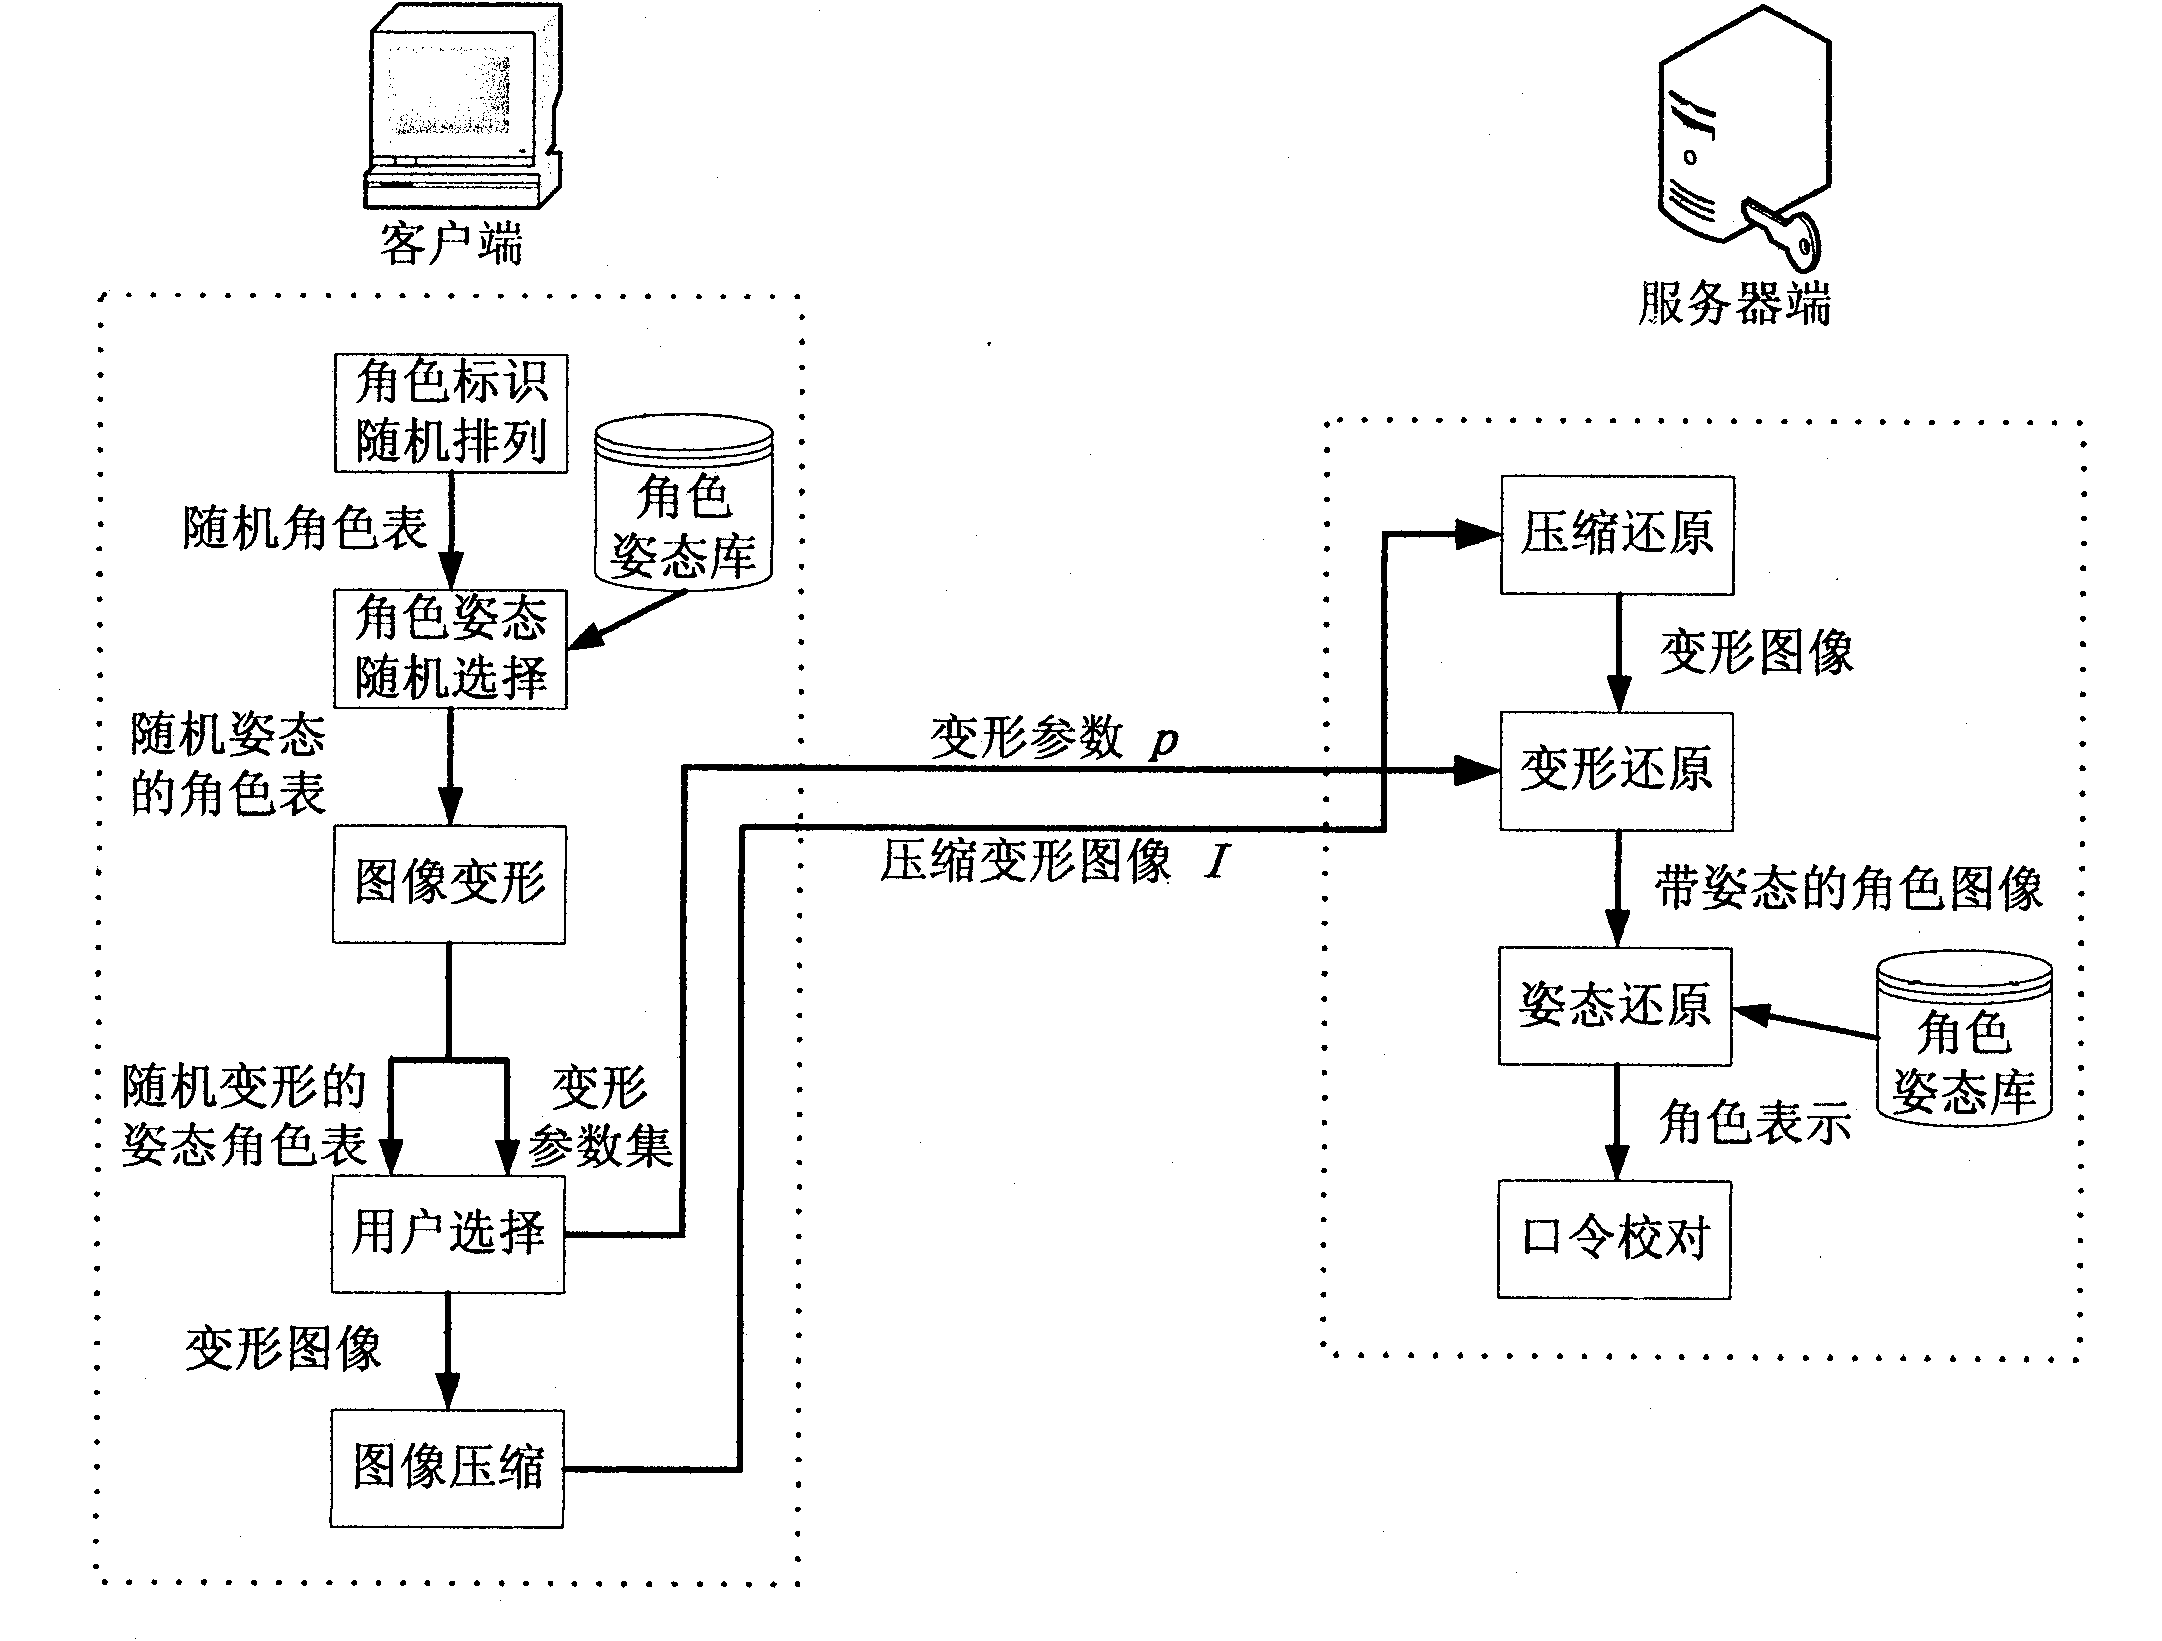 Character deformation-based graphical password authentication method